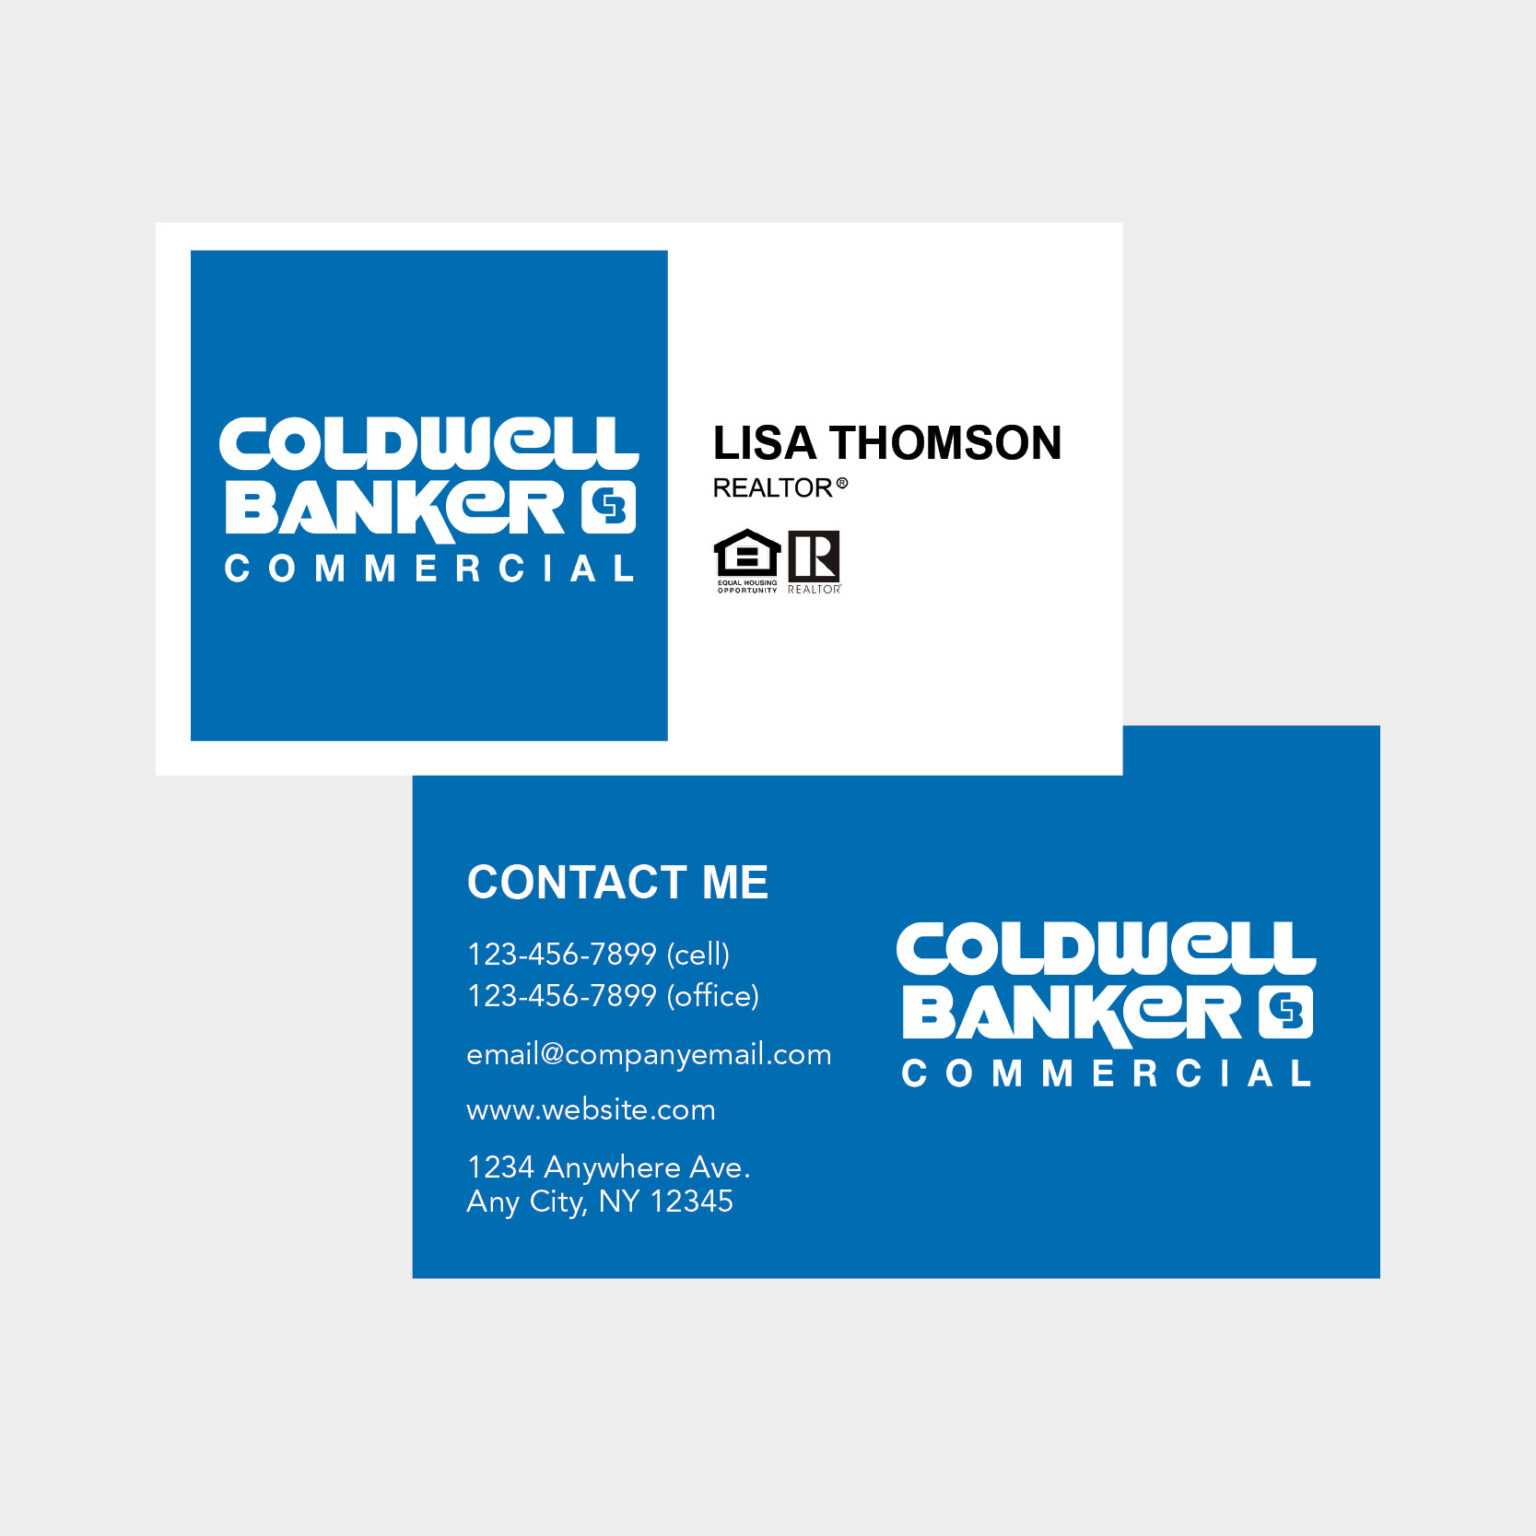 Coldwell Banker Business Card Template Best Professional Templates